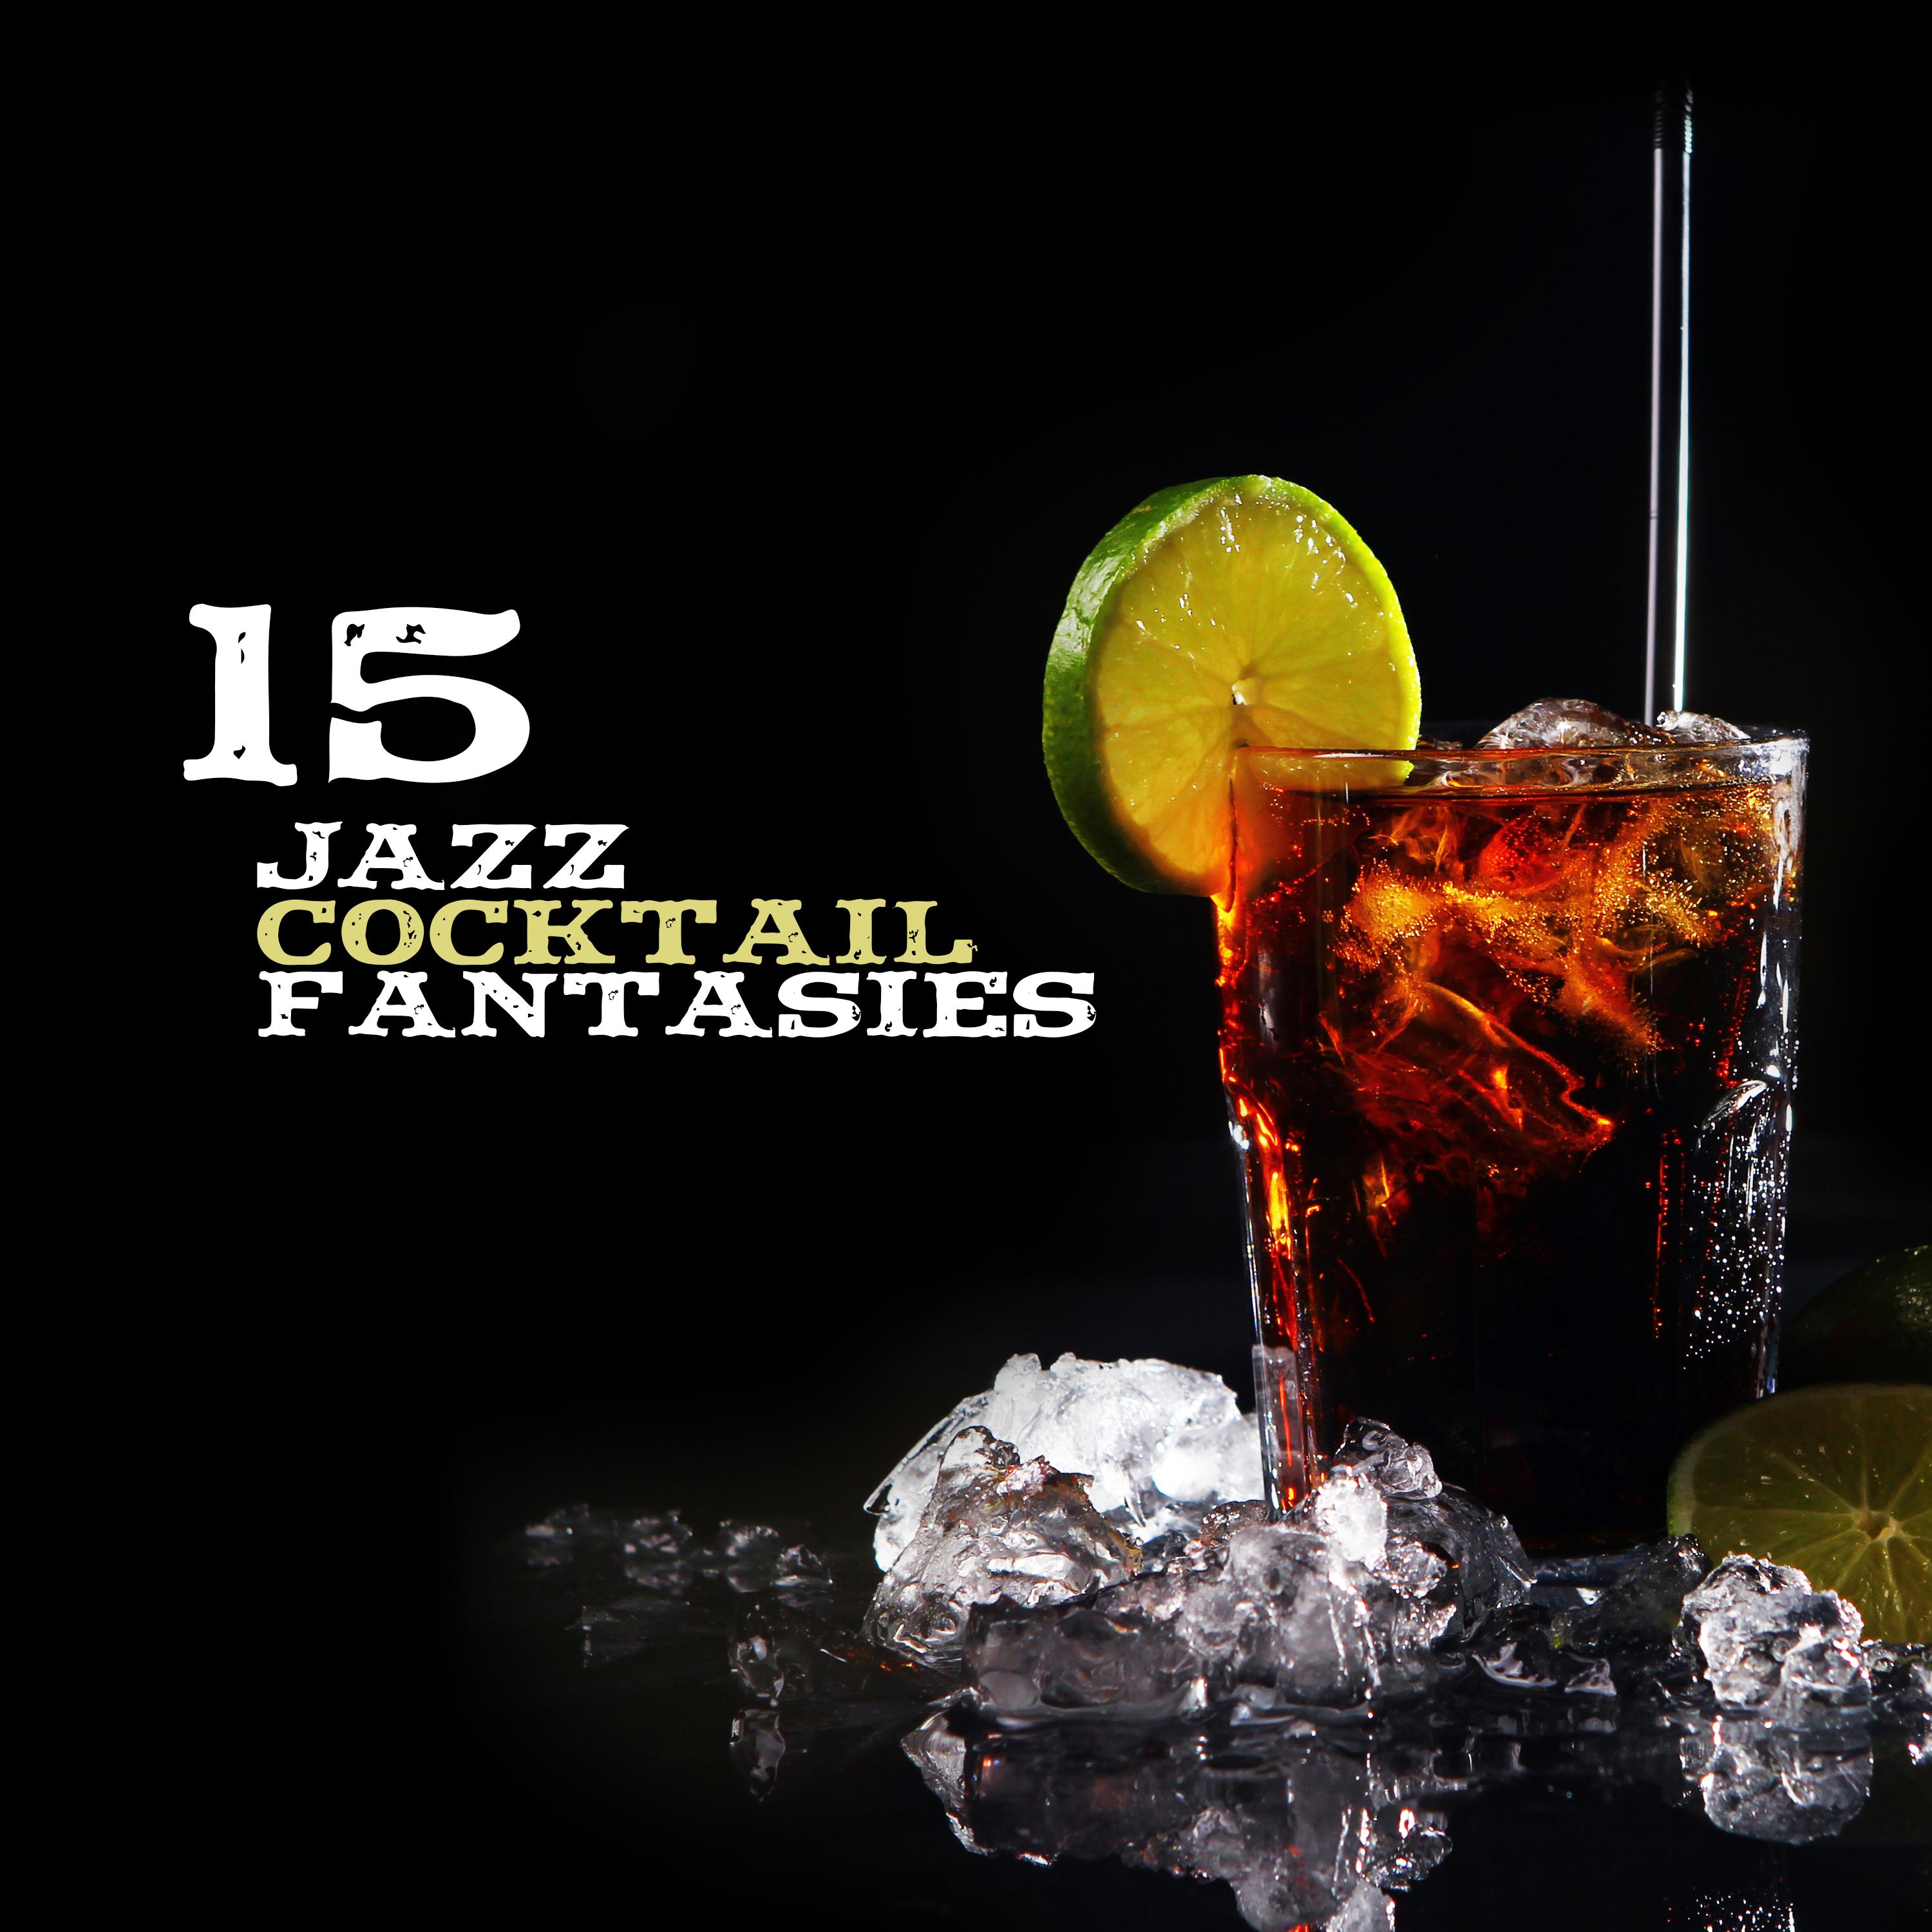 15 Jazz Cocktail Fantasies: 2019 Instrumental Smooth Swing Jazz Music Perfect for Elegant Cocktail Party, Spending Happy Time with Friends & Love in the Restaurant, Cafe or Jazz Club